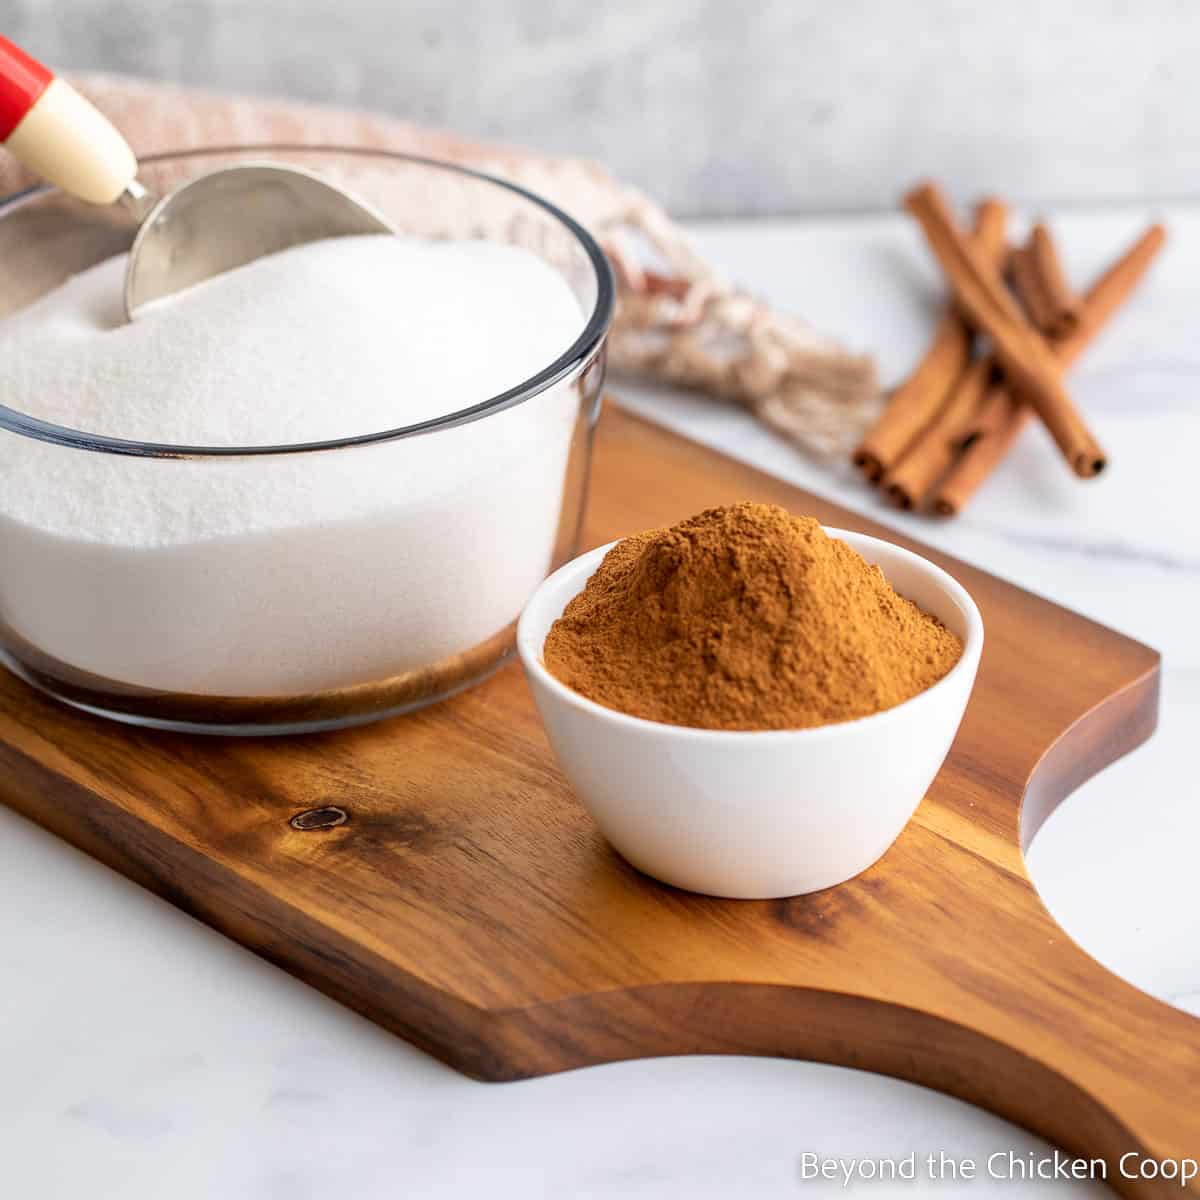 A bowl of sugar and a bowl of cinnamon on a cutting board.